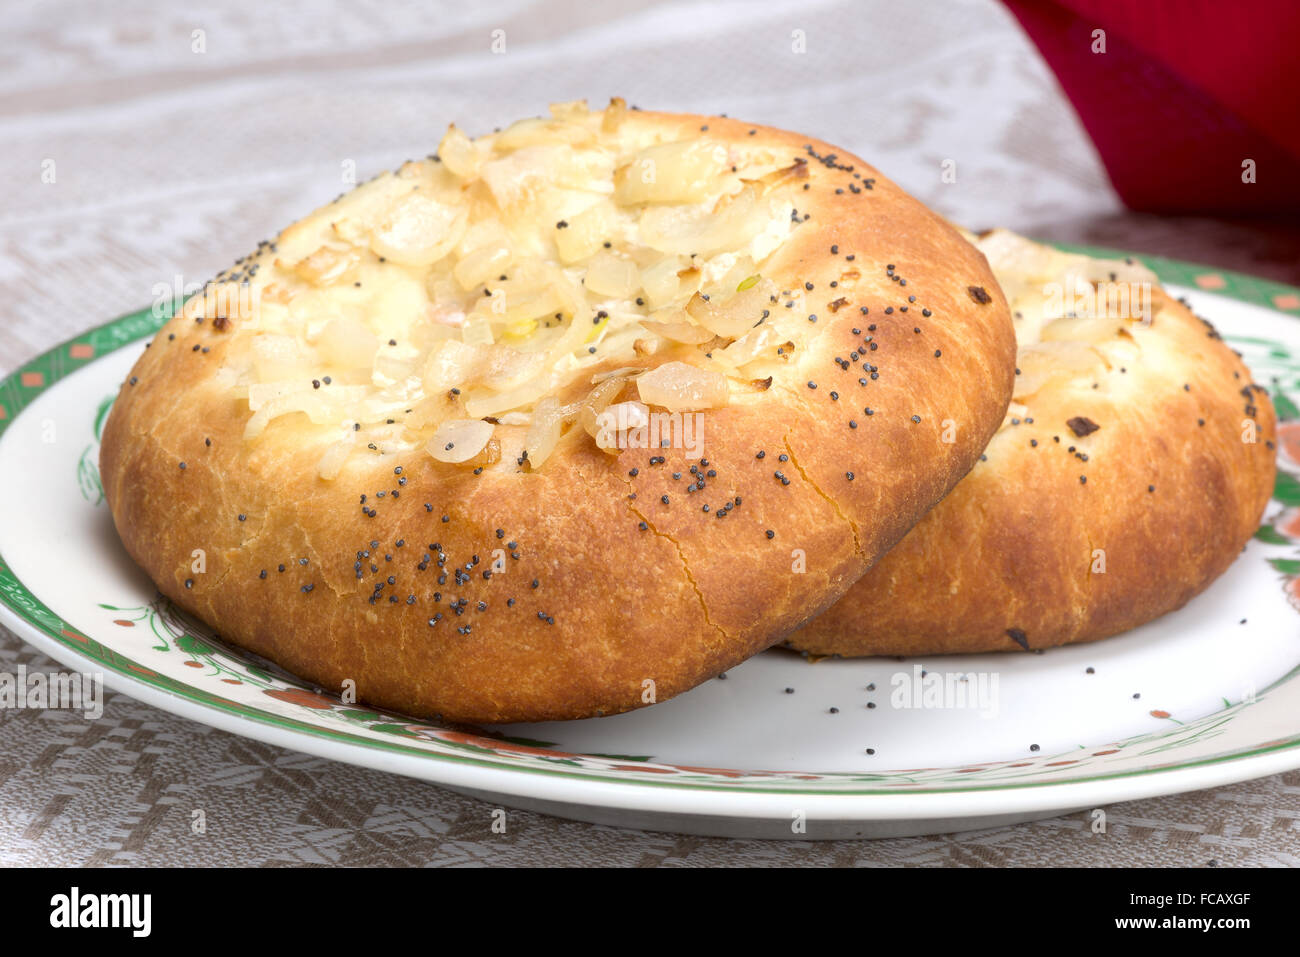 A traditional Ashkenazi Jewish flatbread with onion toppings sprinkled with poppy seeds Stock Photo